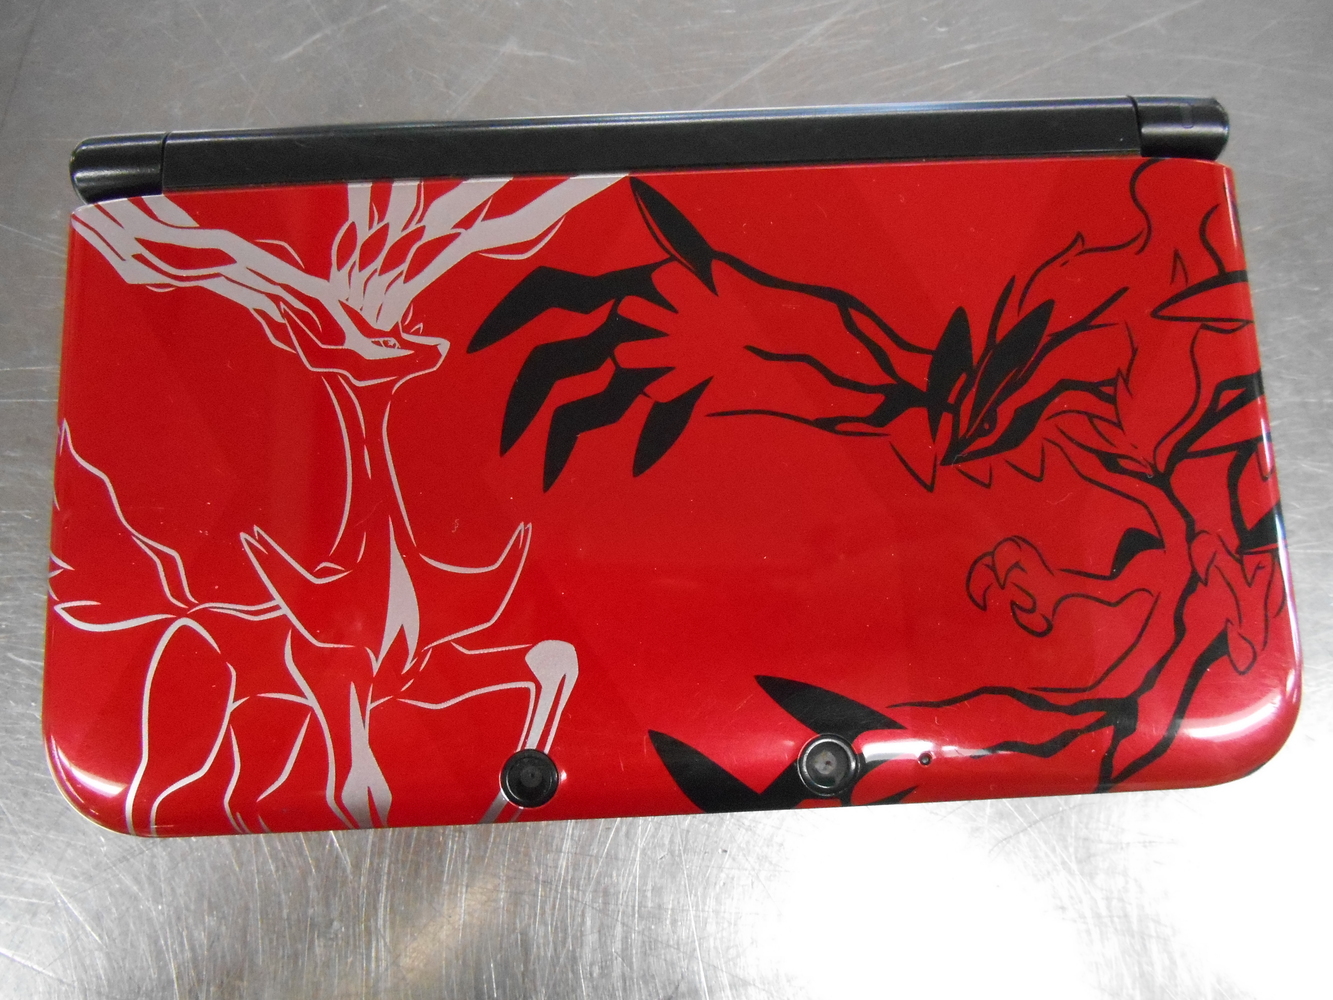 Nintendo NEW 3DS XL Pokemon X & Y Limited Edition Handheld Gaming Console